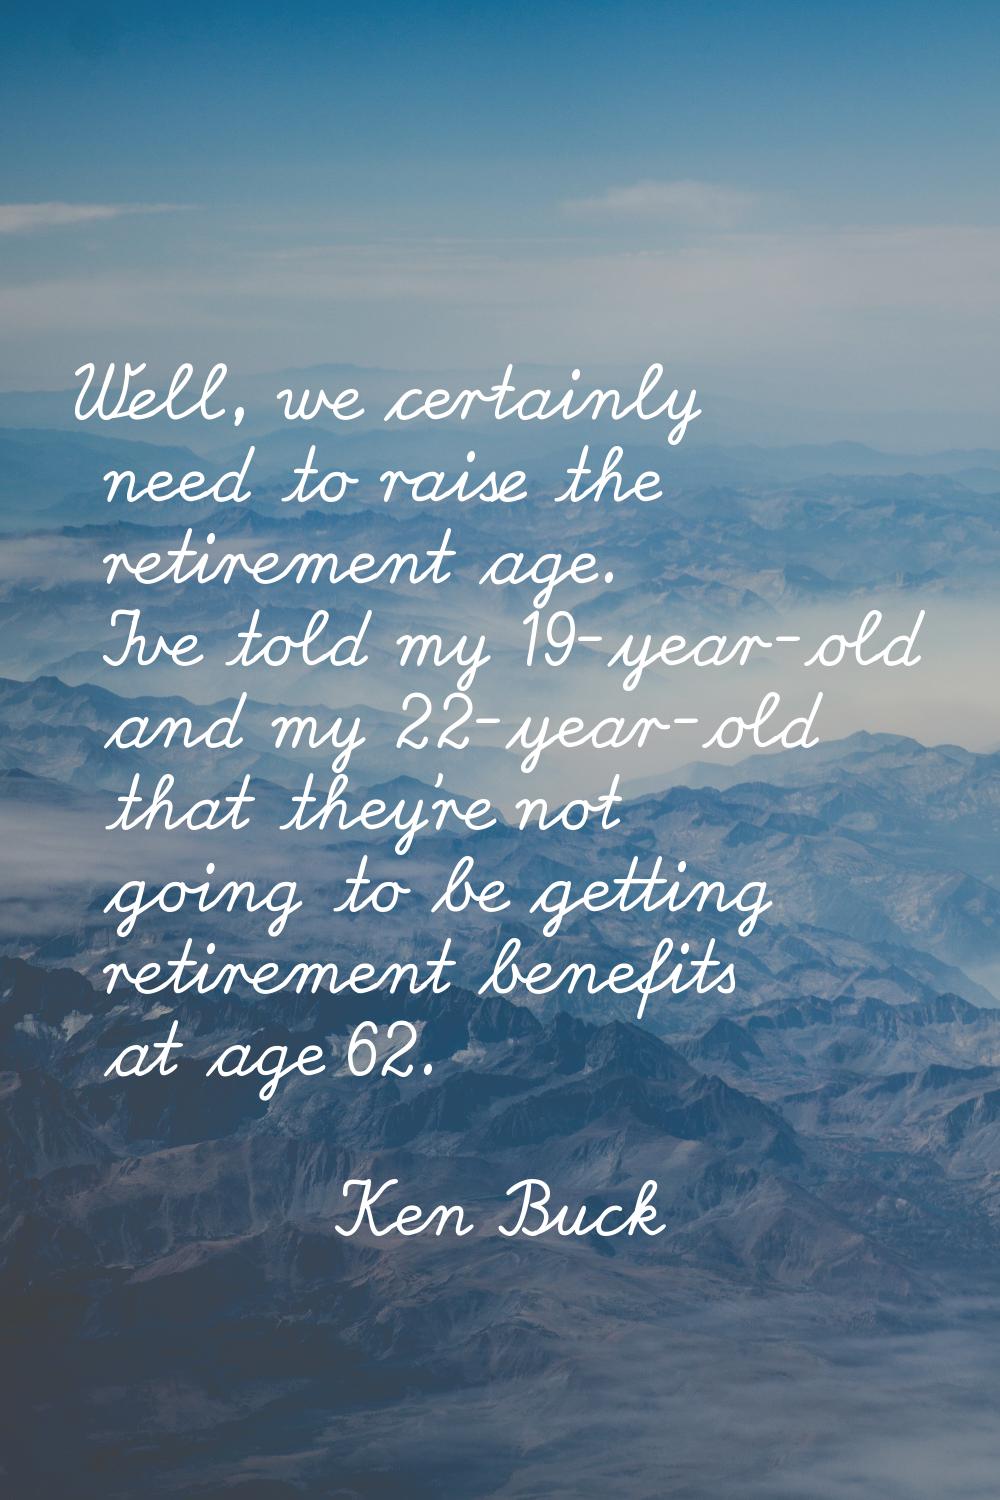 Well, we certainly need to raise the retirement age. I've told my 19-year-old and my 22-year-old th